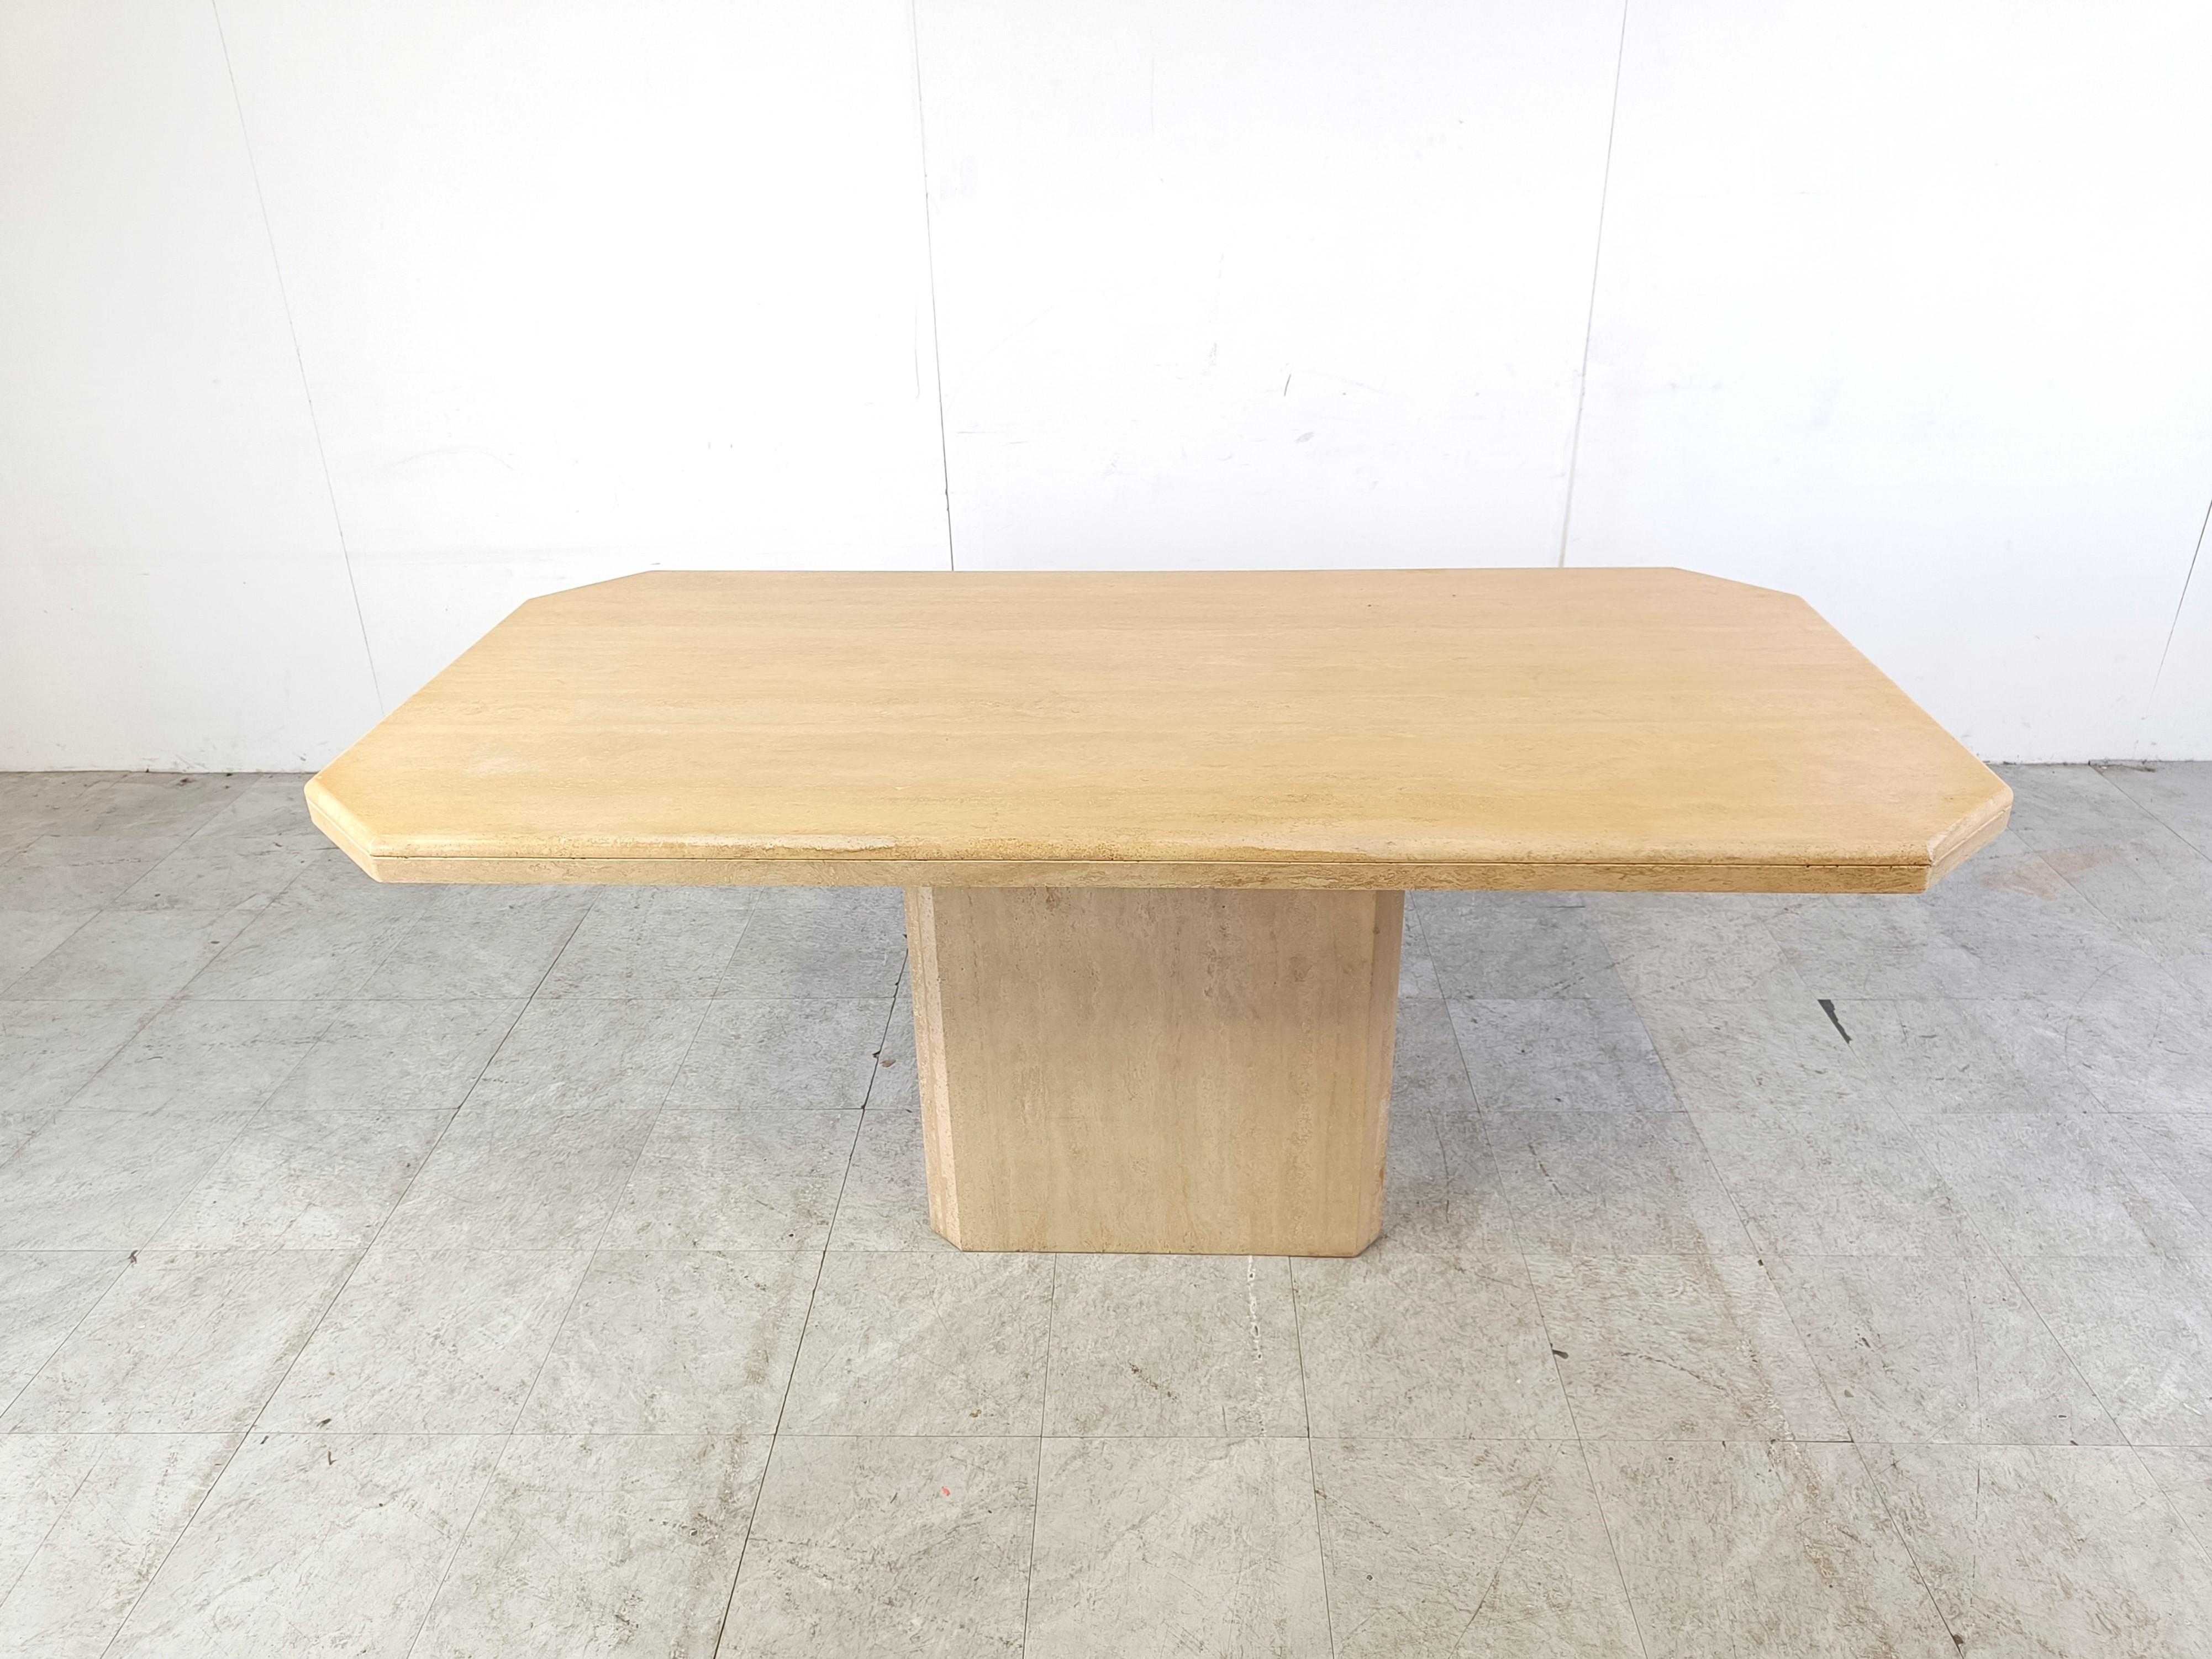 Vintage solid travertine dining table.

The table has a thick durable top and and a central base.

Timeless piece.

1970s - Italy

Good condition

Dimensions:
Height: 75cm/29.52